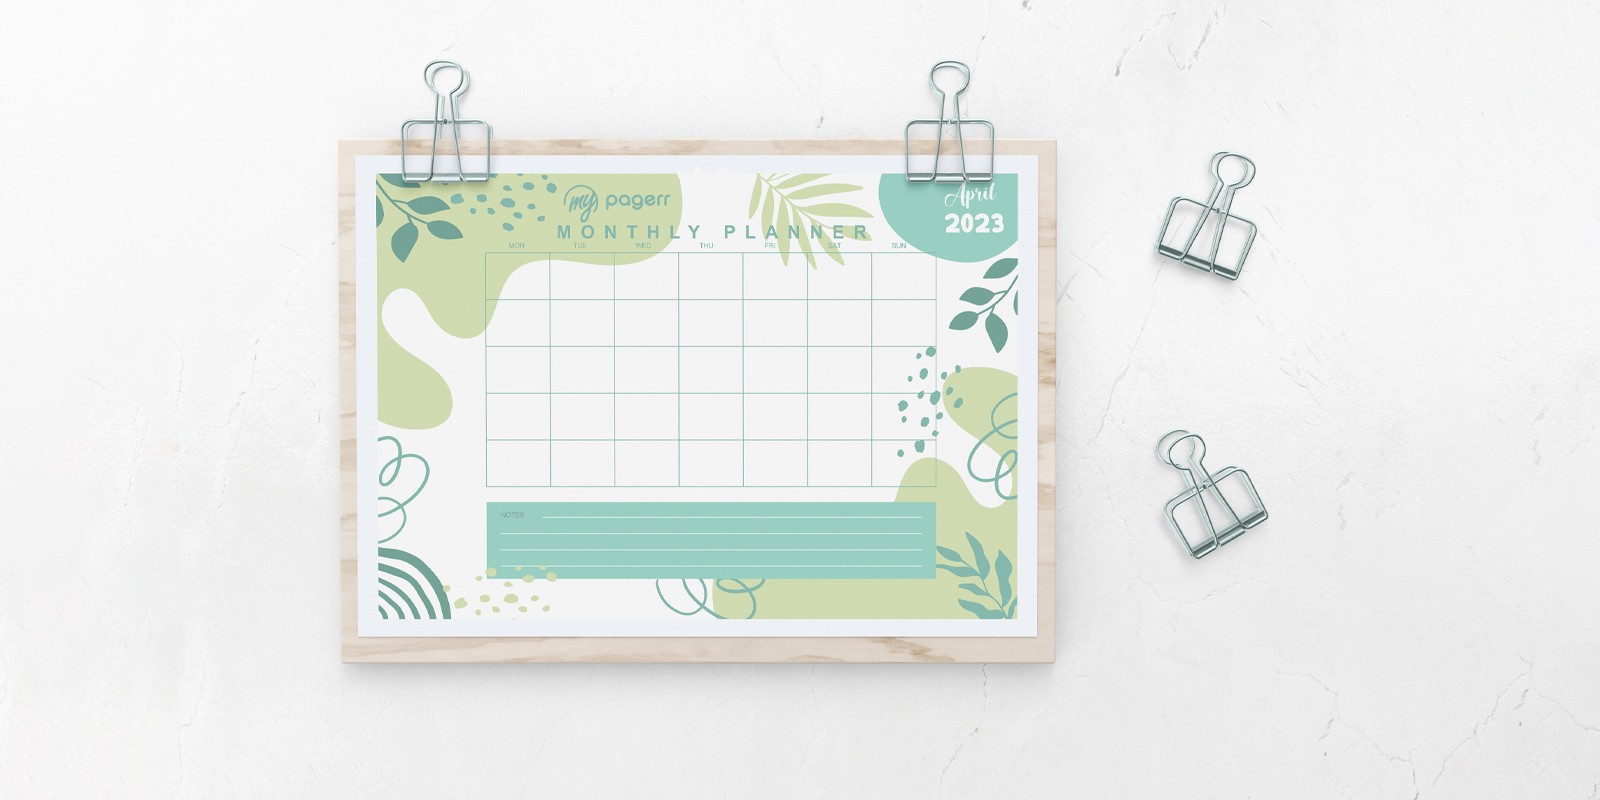 Calendar planners in Barcelona - Print with Pagerr